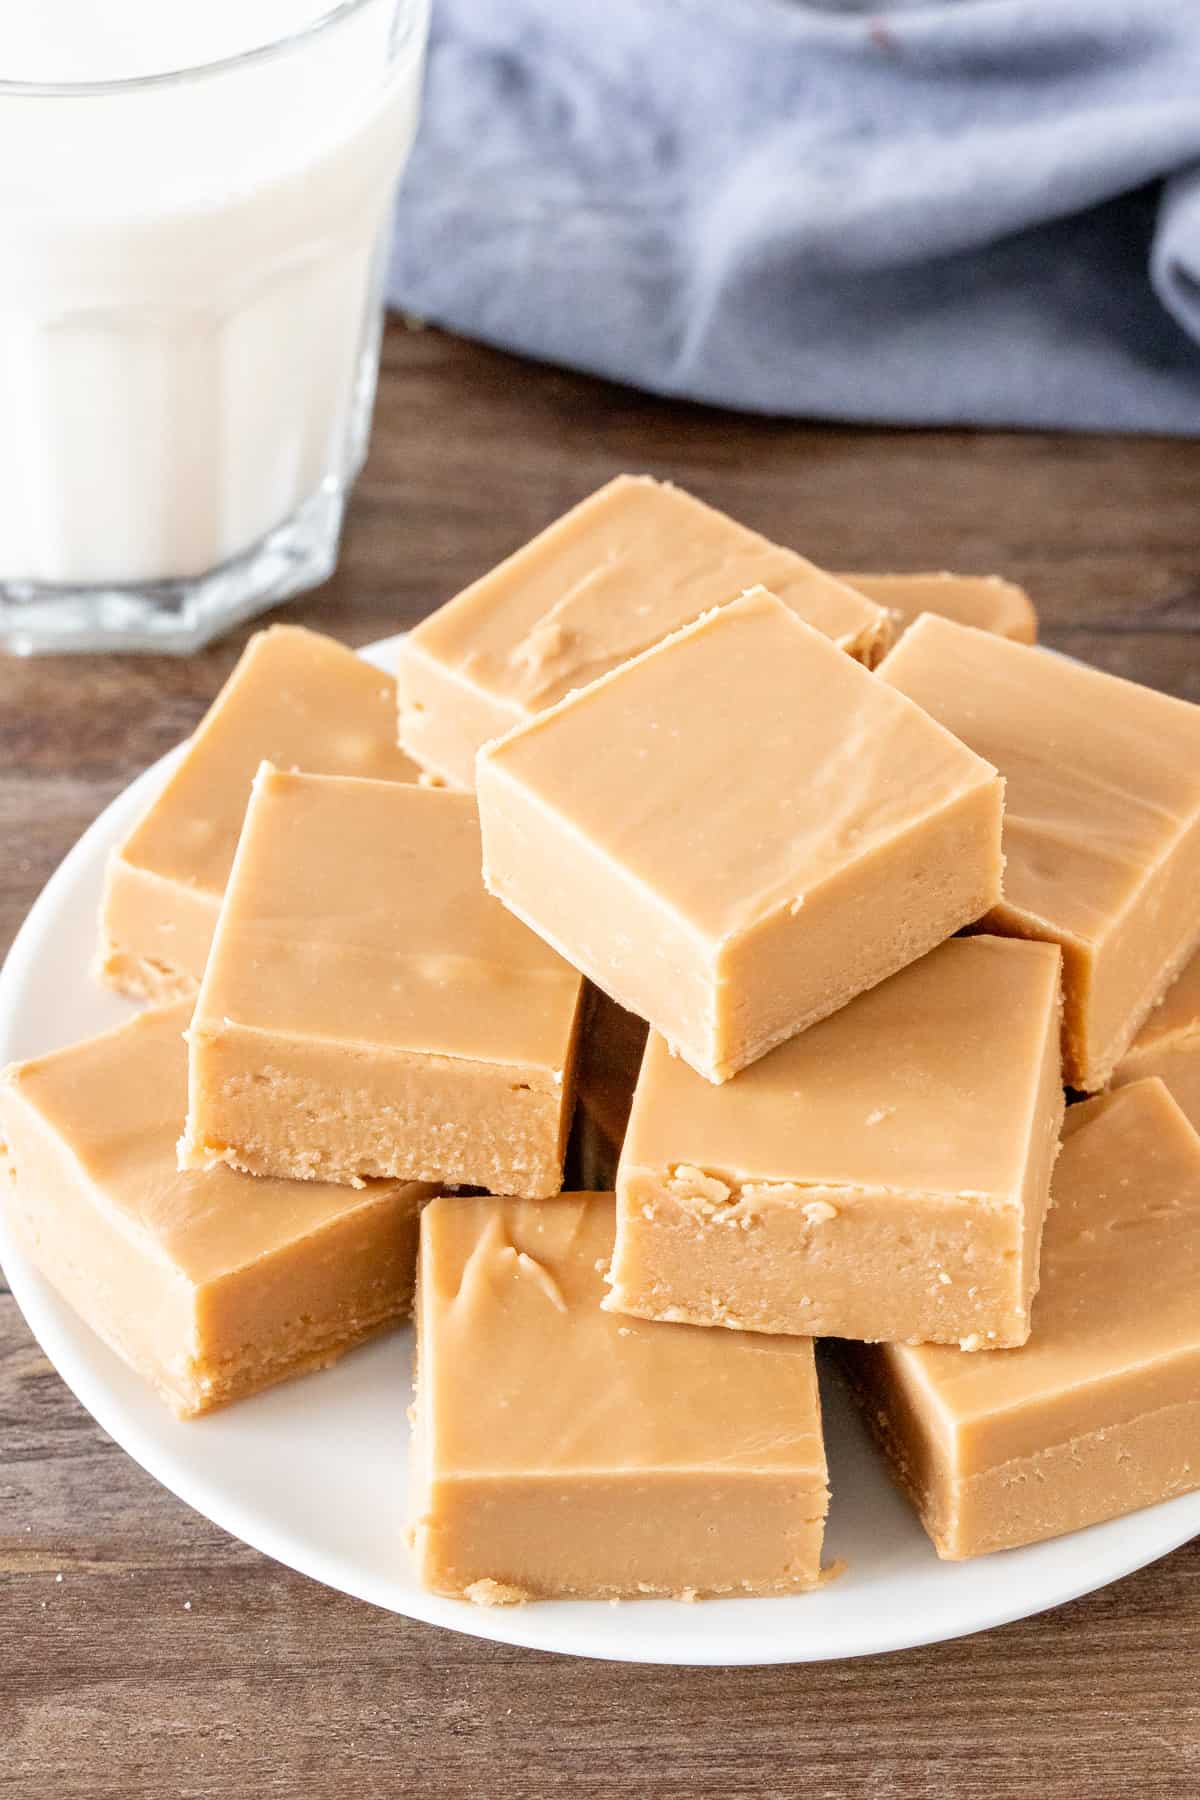 Plate of caramel fudge with glass of milk